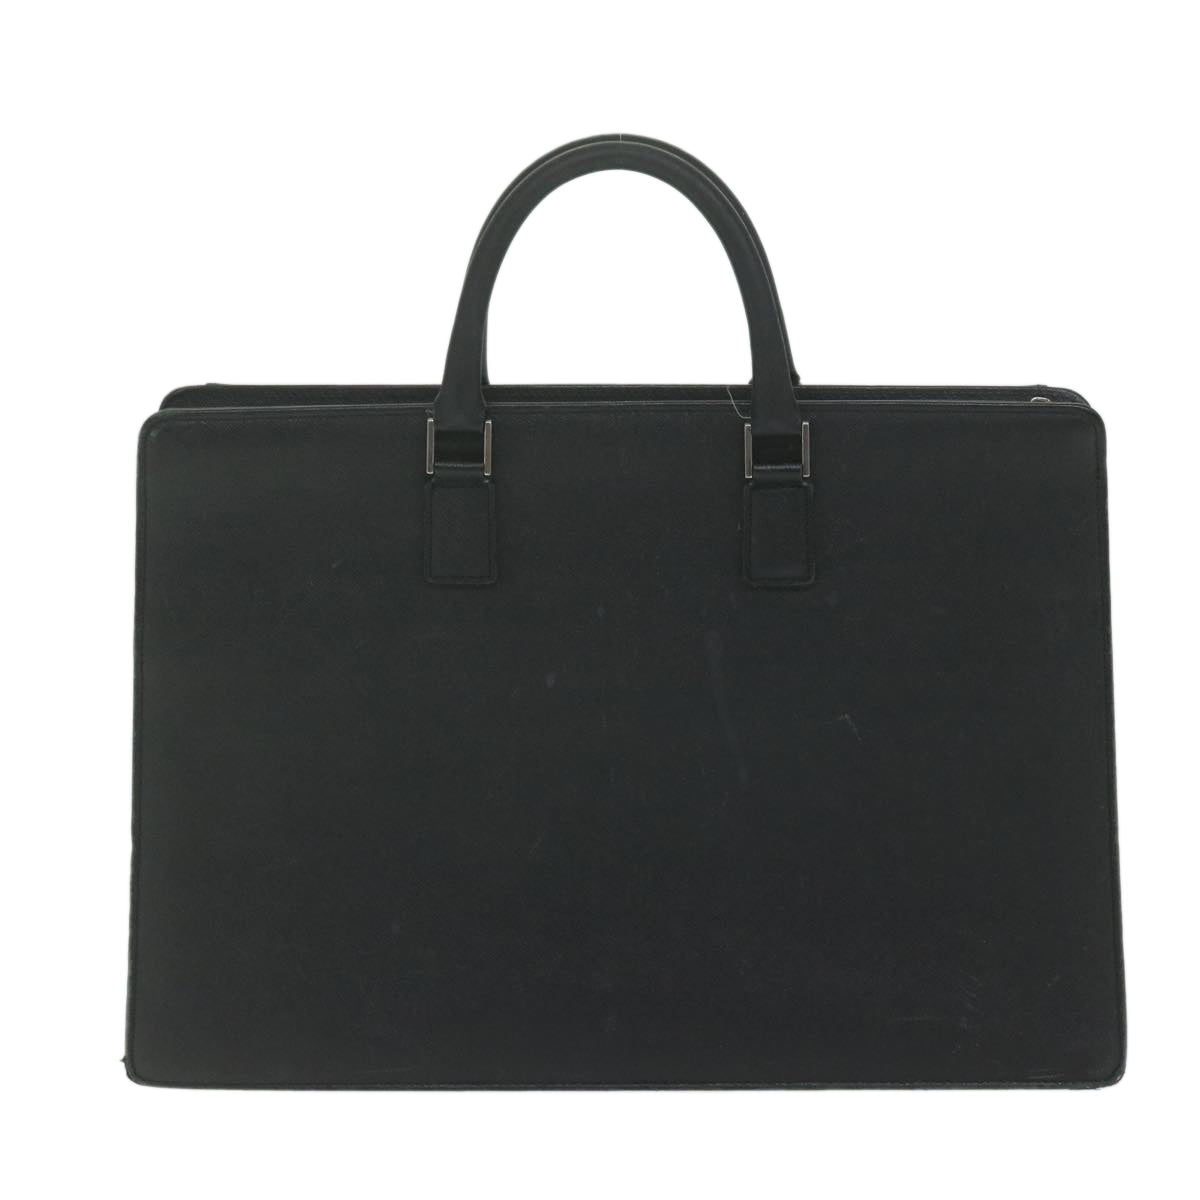 BURBERRY Briefcase Leather Black Auth ep2580 - 0